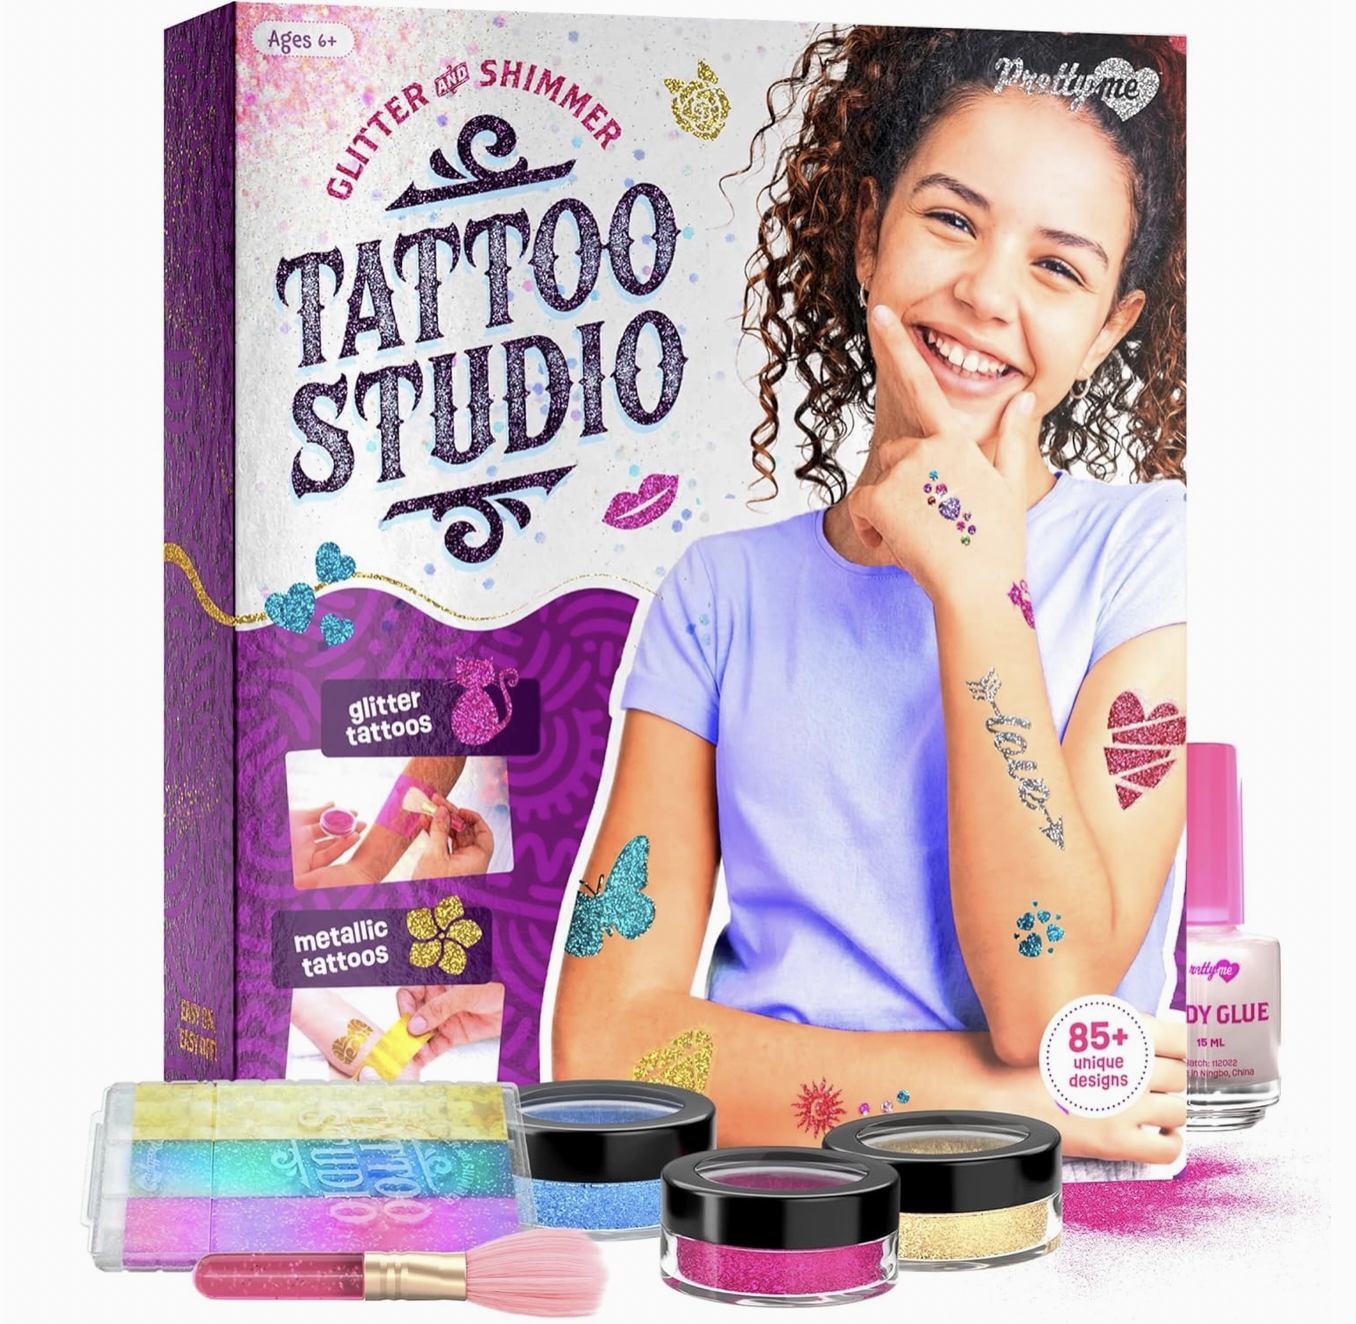 What Kind of Tattoo Kit is Best For Beginners?